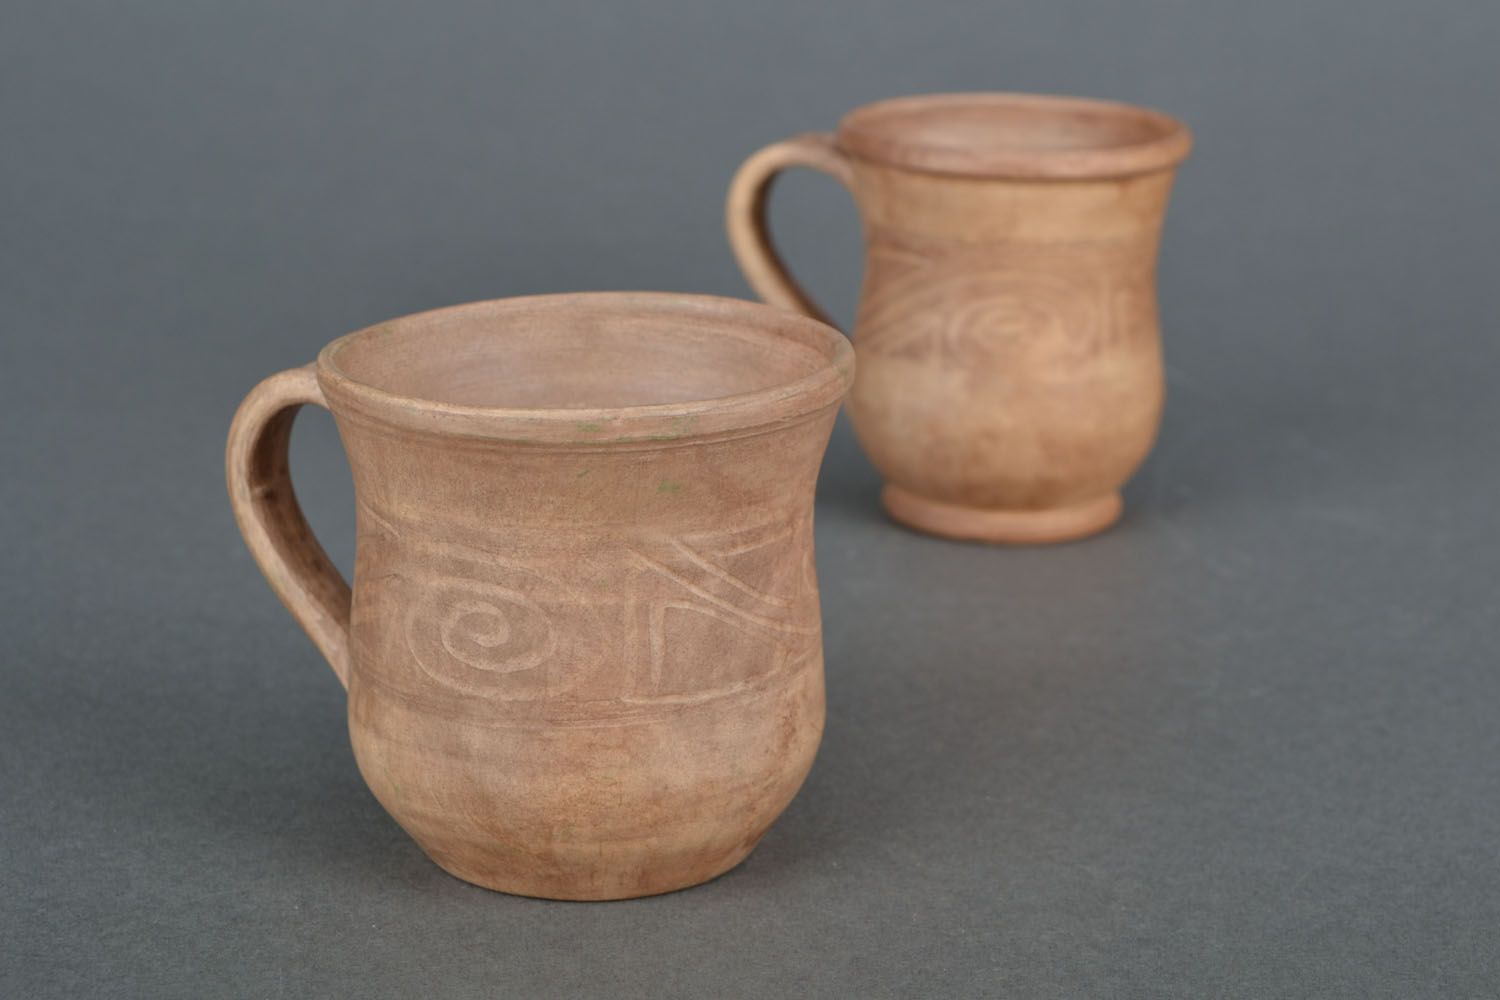 Medium size white clay not glazed tea cup with handle and Greek-style geometric pattern photo 1